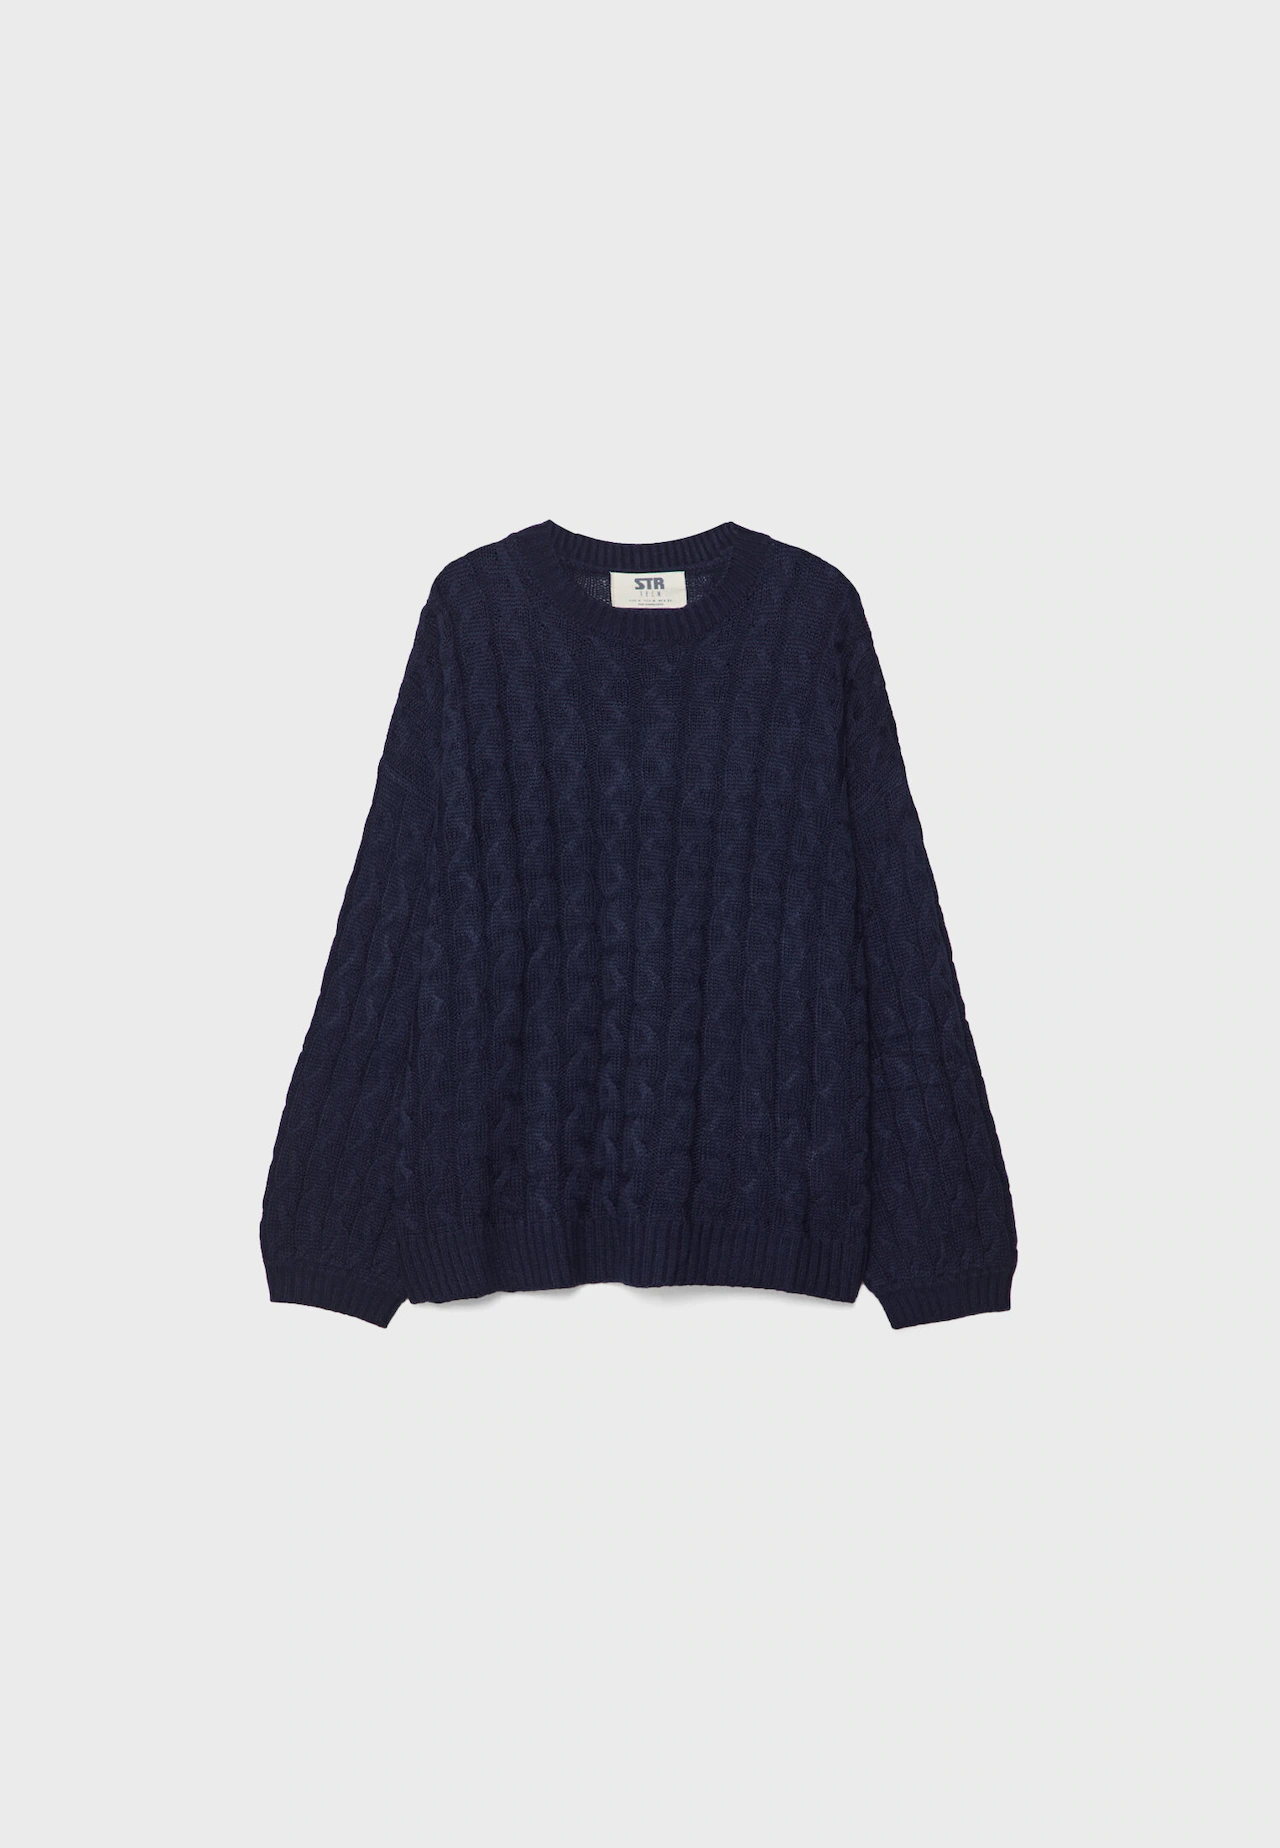 Oversize cable-knit sweater - Women's fashion